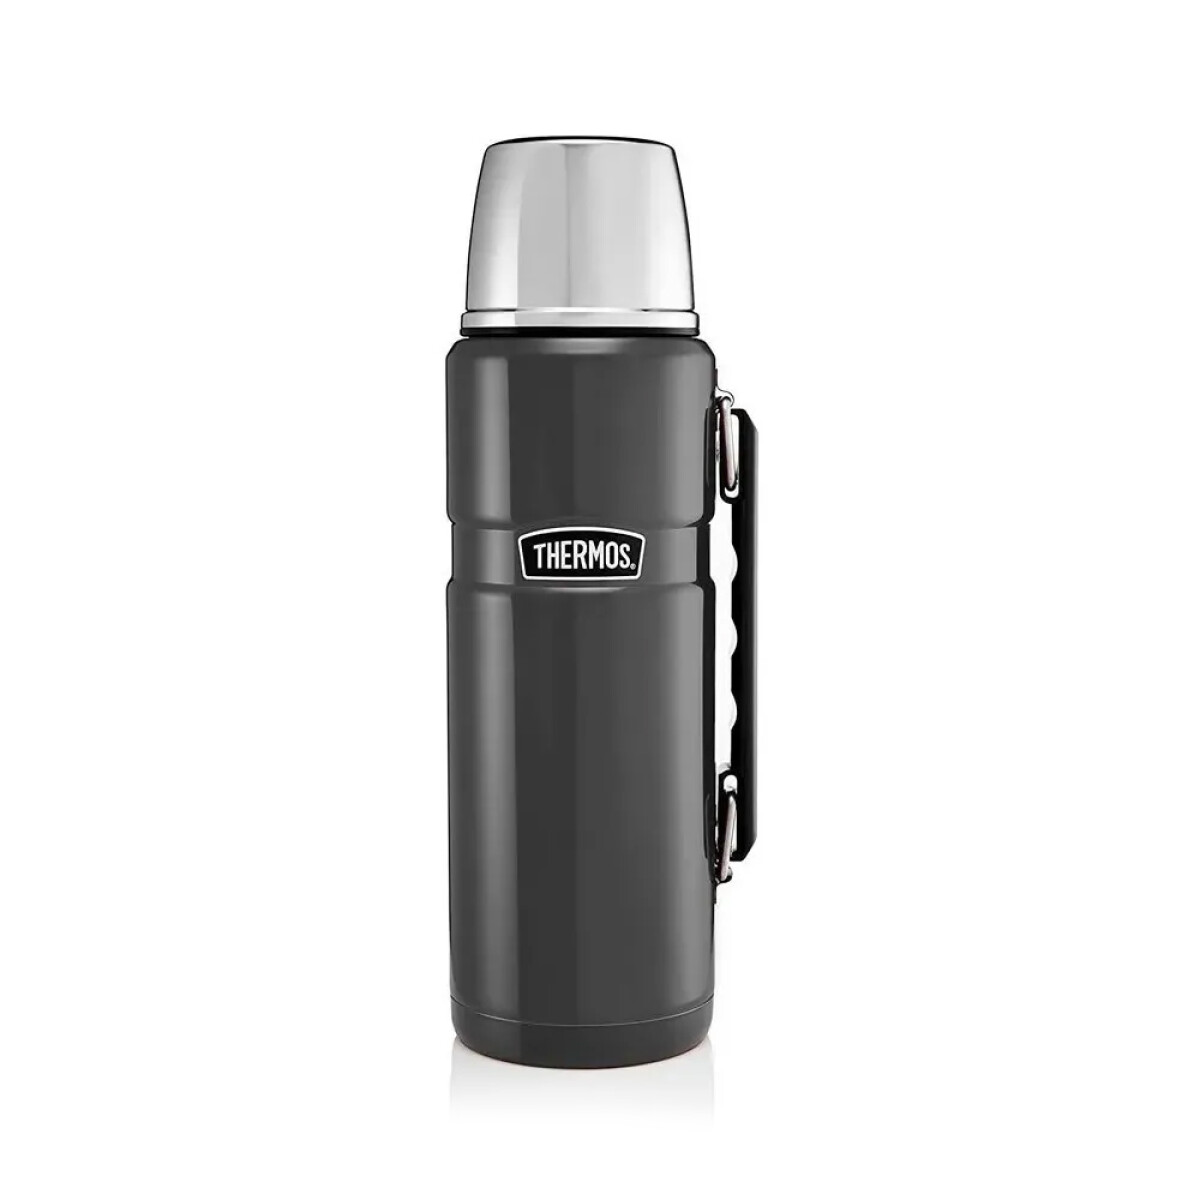 Termo Acero 1.2 Lts Marca Thermos King - Gris 